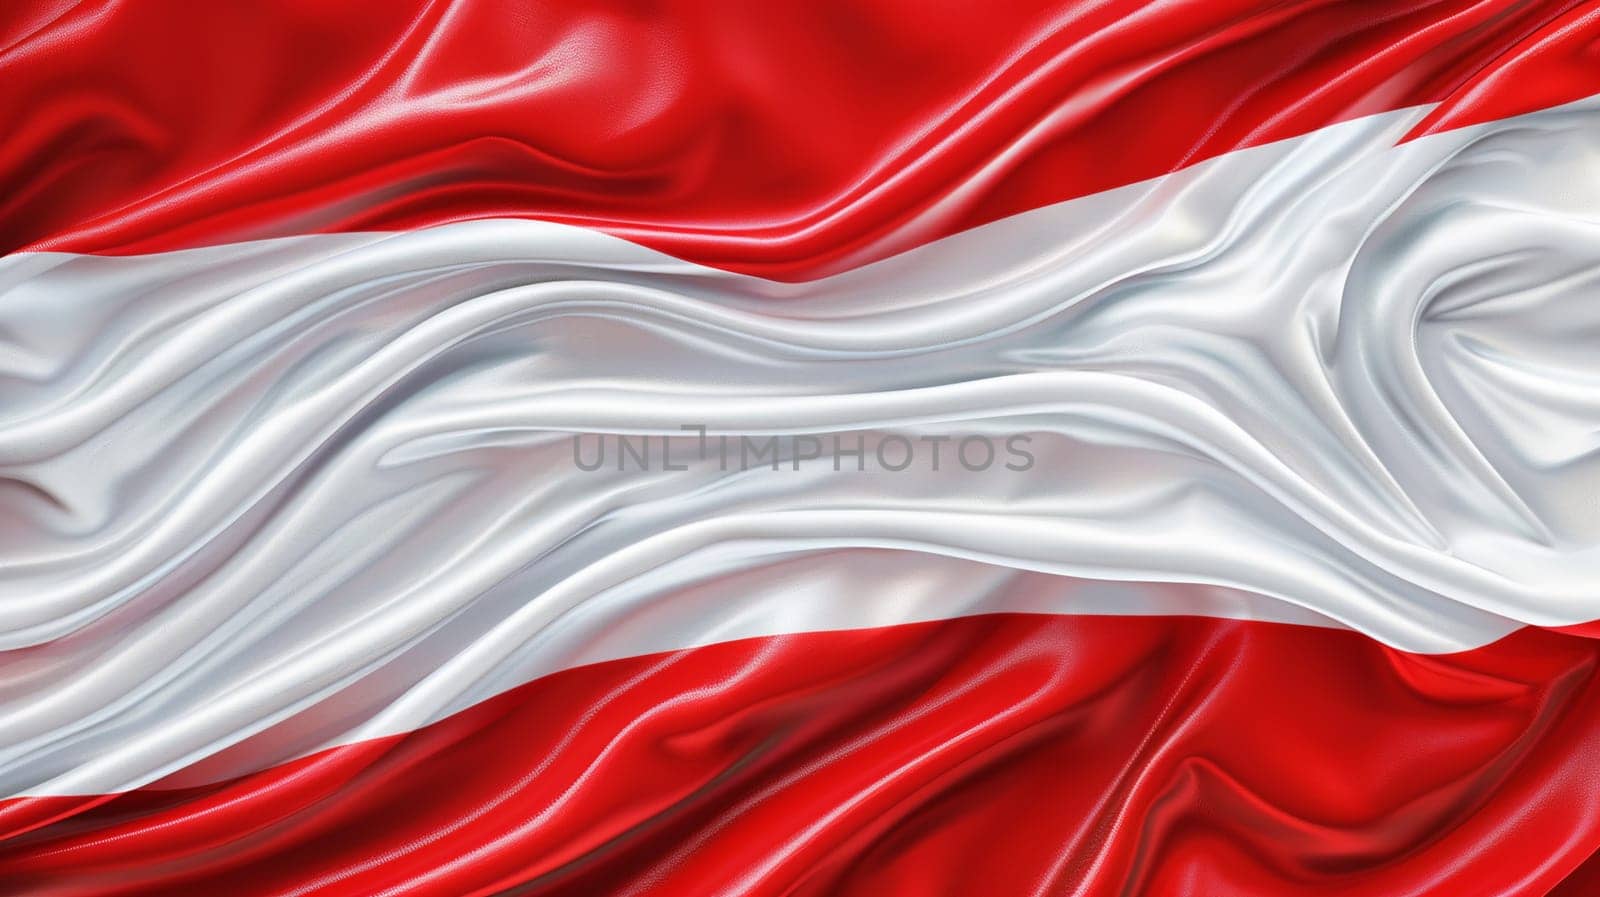 Close-up of wavy silk material representing Austrian flag, showcasing patriotism through vibrant red and white smooth folds.